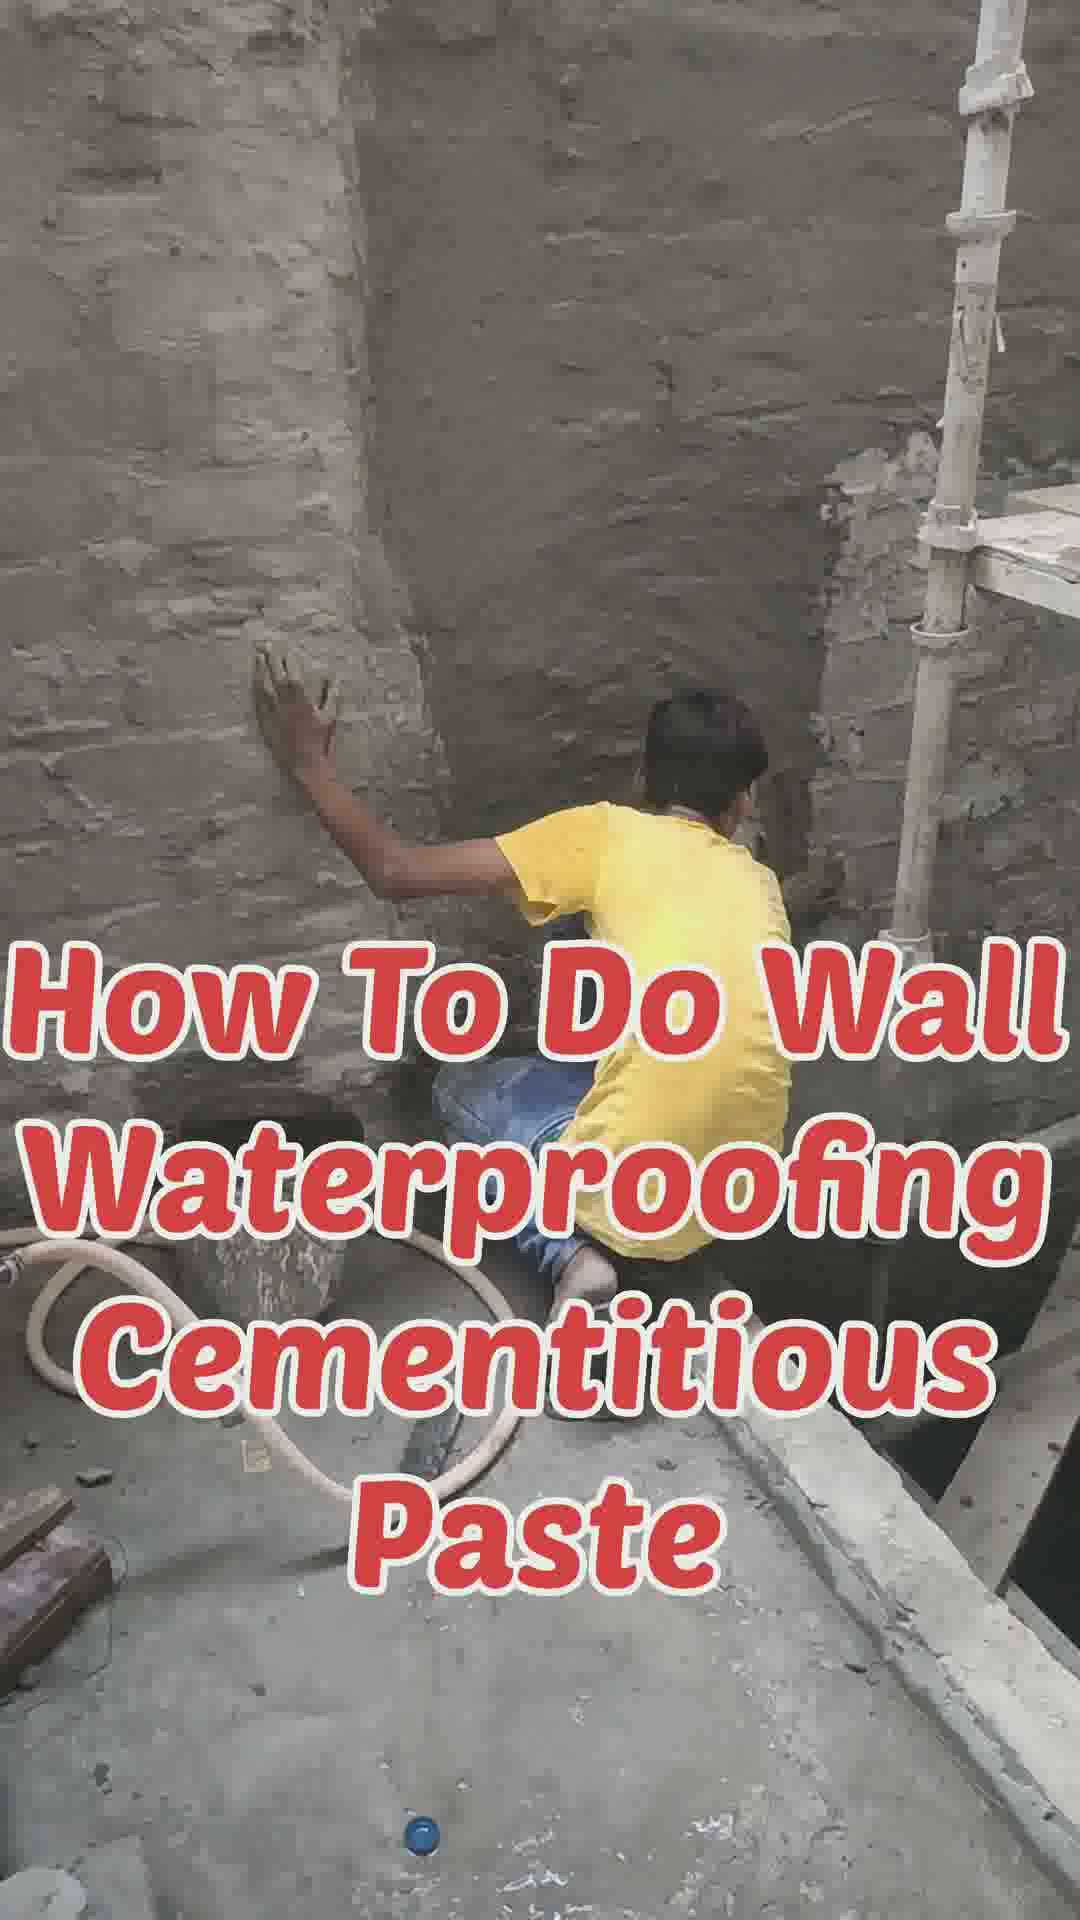 how to do wall waterproofing cementitious paste
 #wallwaterproofing